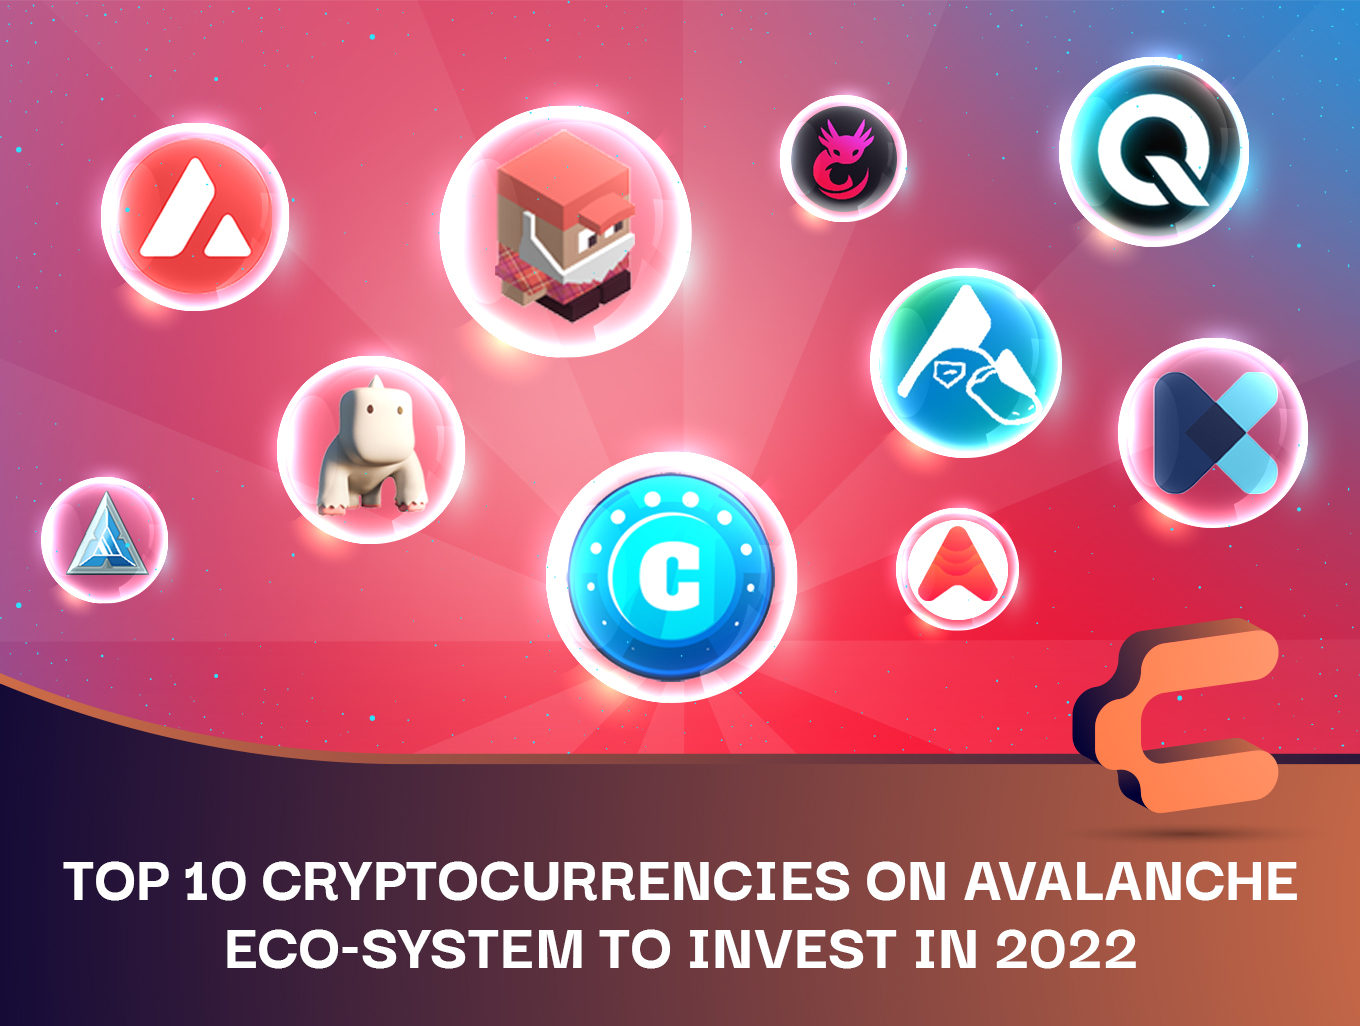 Top 10 Cryptocurrencies on Avalanche Eco system to Invest In 2022 2